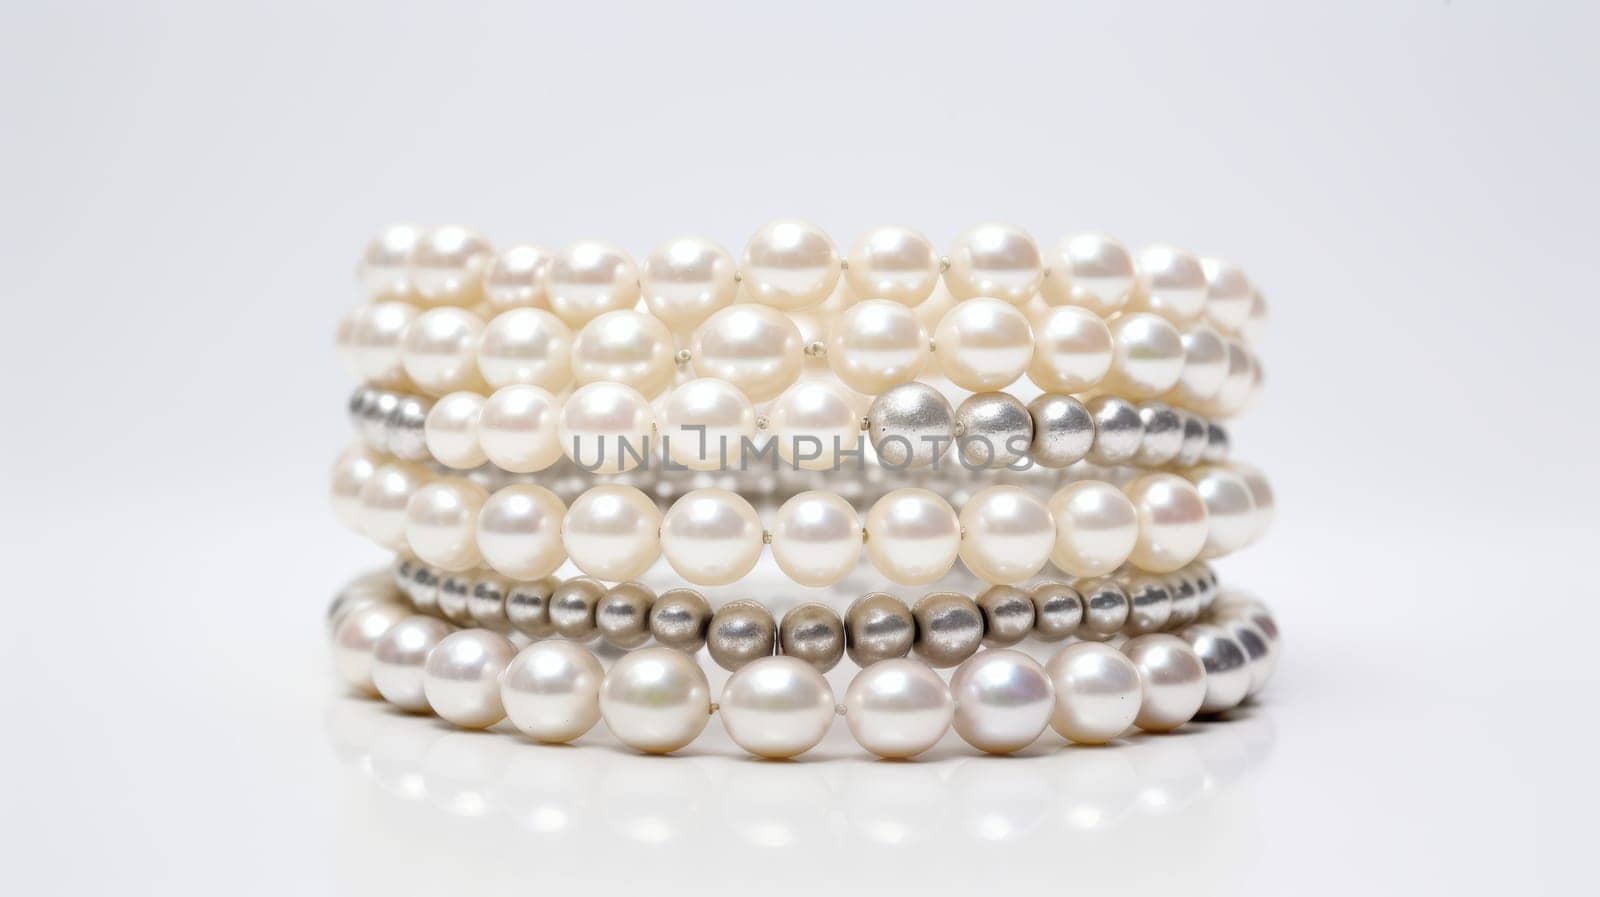 Stack of pearl bracelets on white background. Round pearls in white, cream and silver shades. Layered and tilted bracelets. Perfect for themes of elegance, luxury and beauty. High quality photo